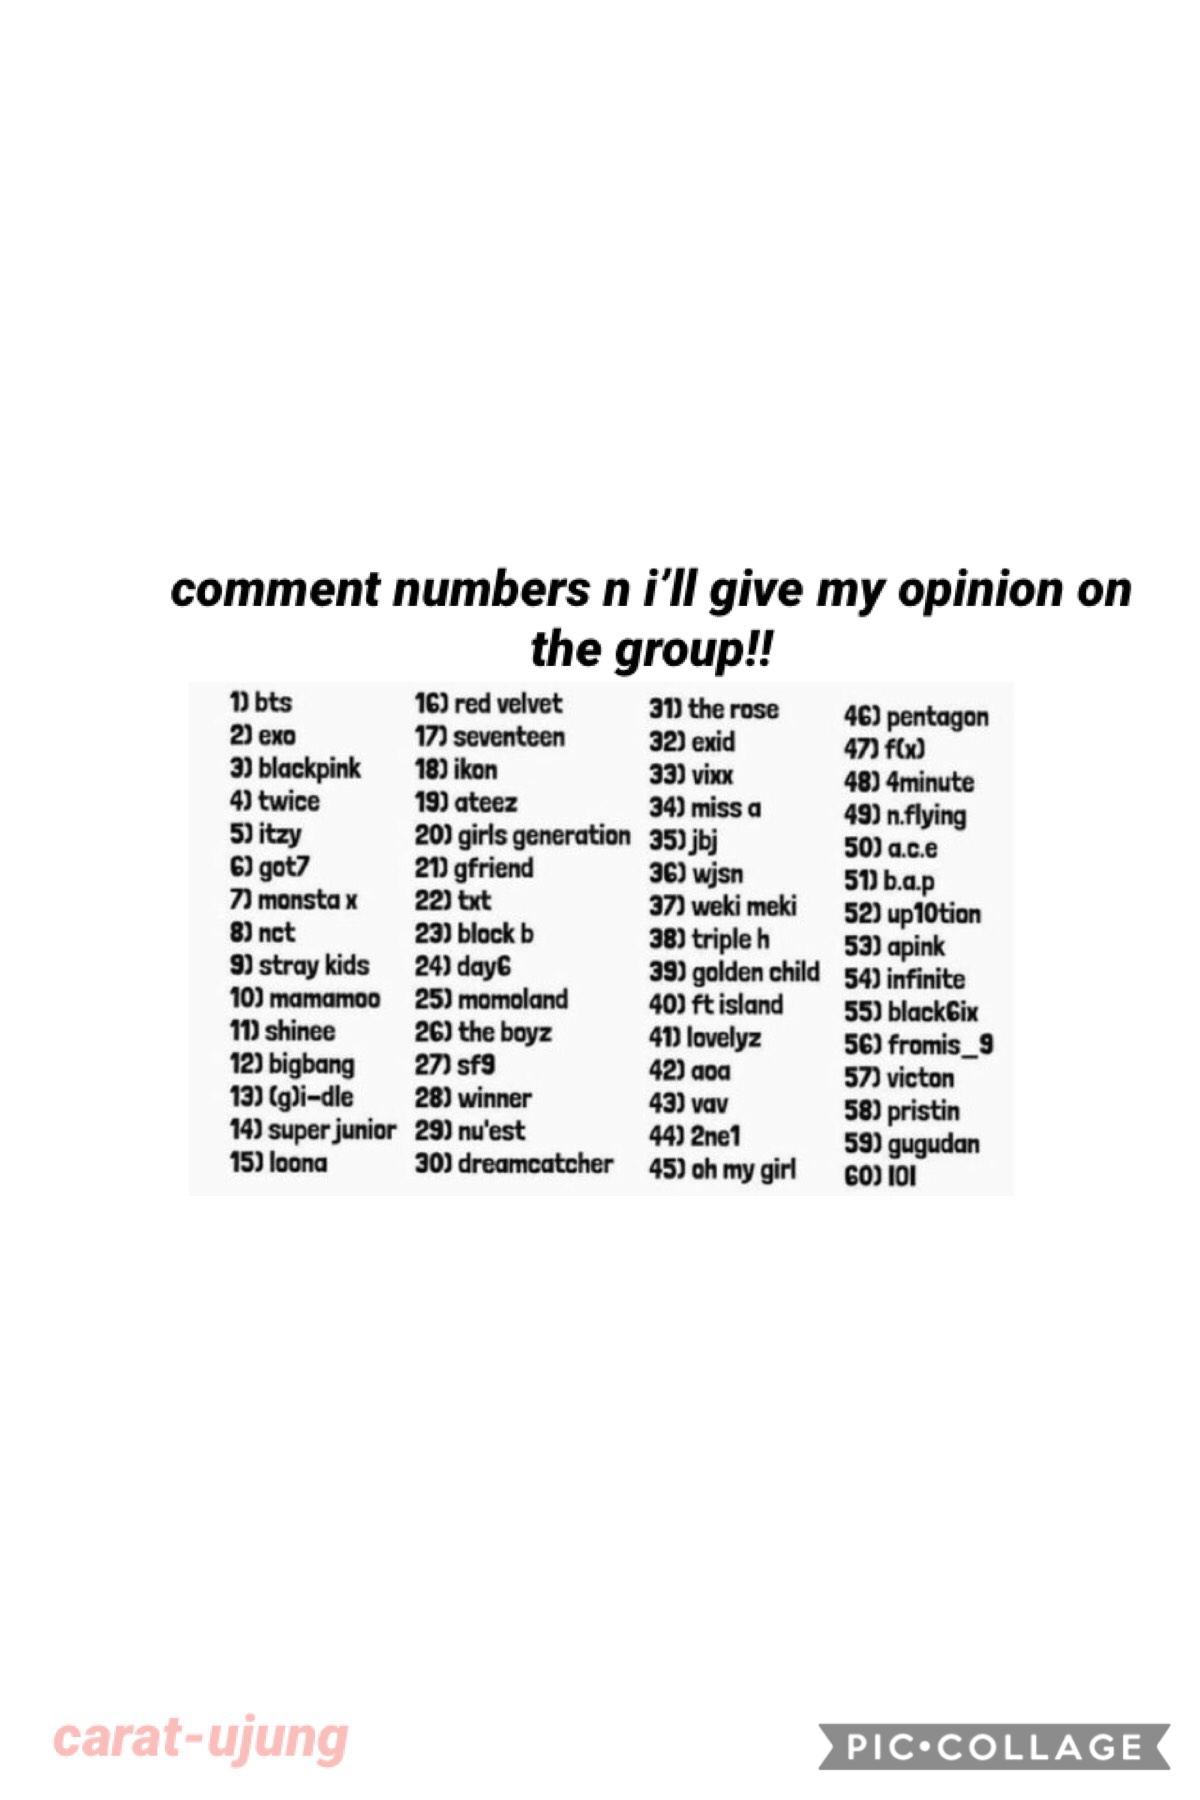 ☆ t a p ☆
pls don’t let this flop n comment numbers!! 